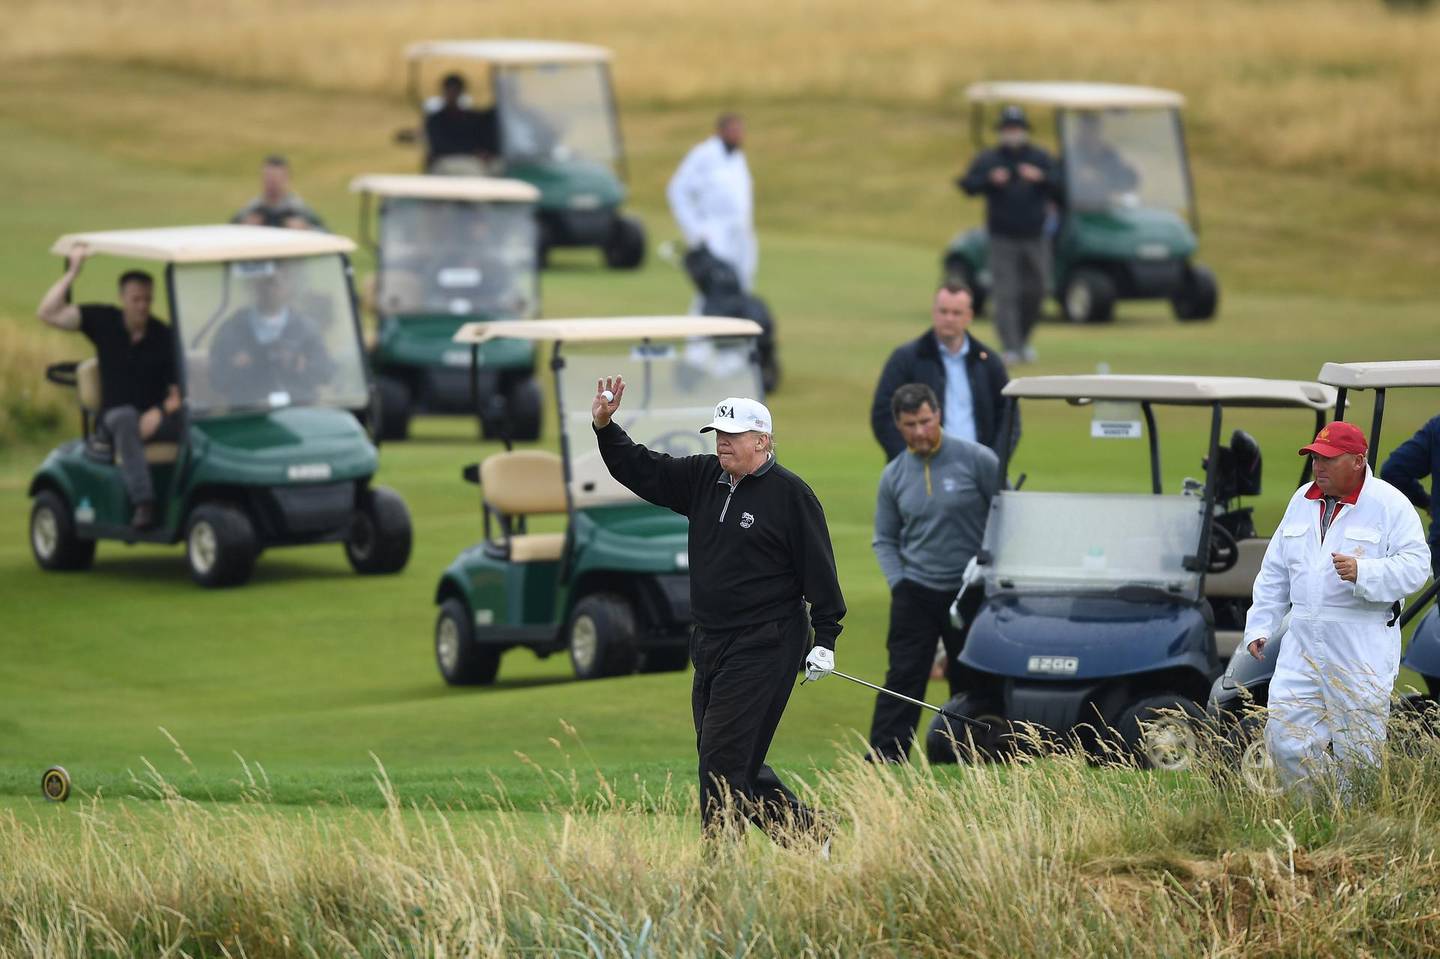 TURNBERRY, SCOTLAND - JULY 15:  U.S. President Donald Trump waves whilst playing a round of golf at Trump Turnberry Luxury Collection Resort during the U.S. President's first official visit to the United Kingdom on July 15, 2018 in Turnberry, Scotland. The President of the United States and First Lady, Melania Trump on their first official visit to the UK after yesterday's meetings with the Prime Minister and the Queen is in Scotland for private weekend stay at his Turnberry.  (Photo by Leon Neal/Getty Images) ***BESTPIX***